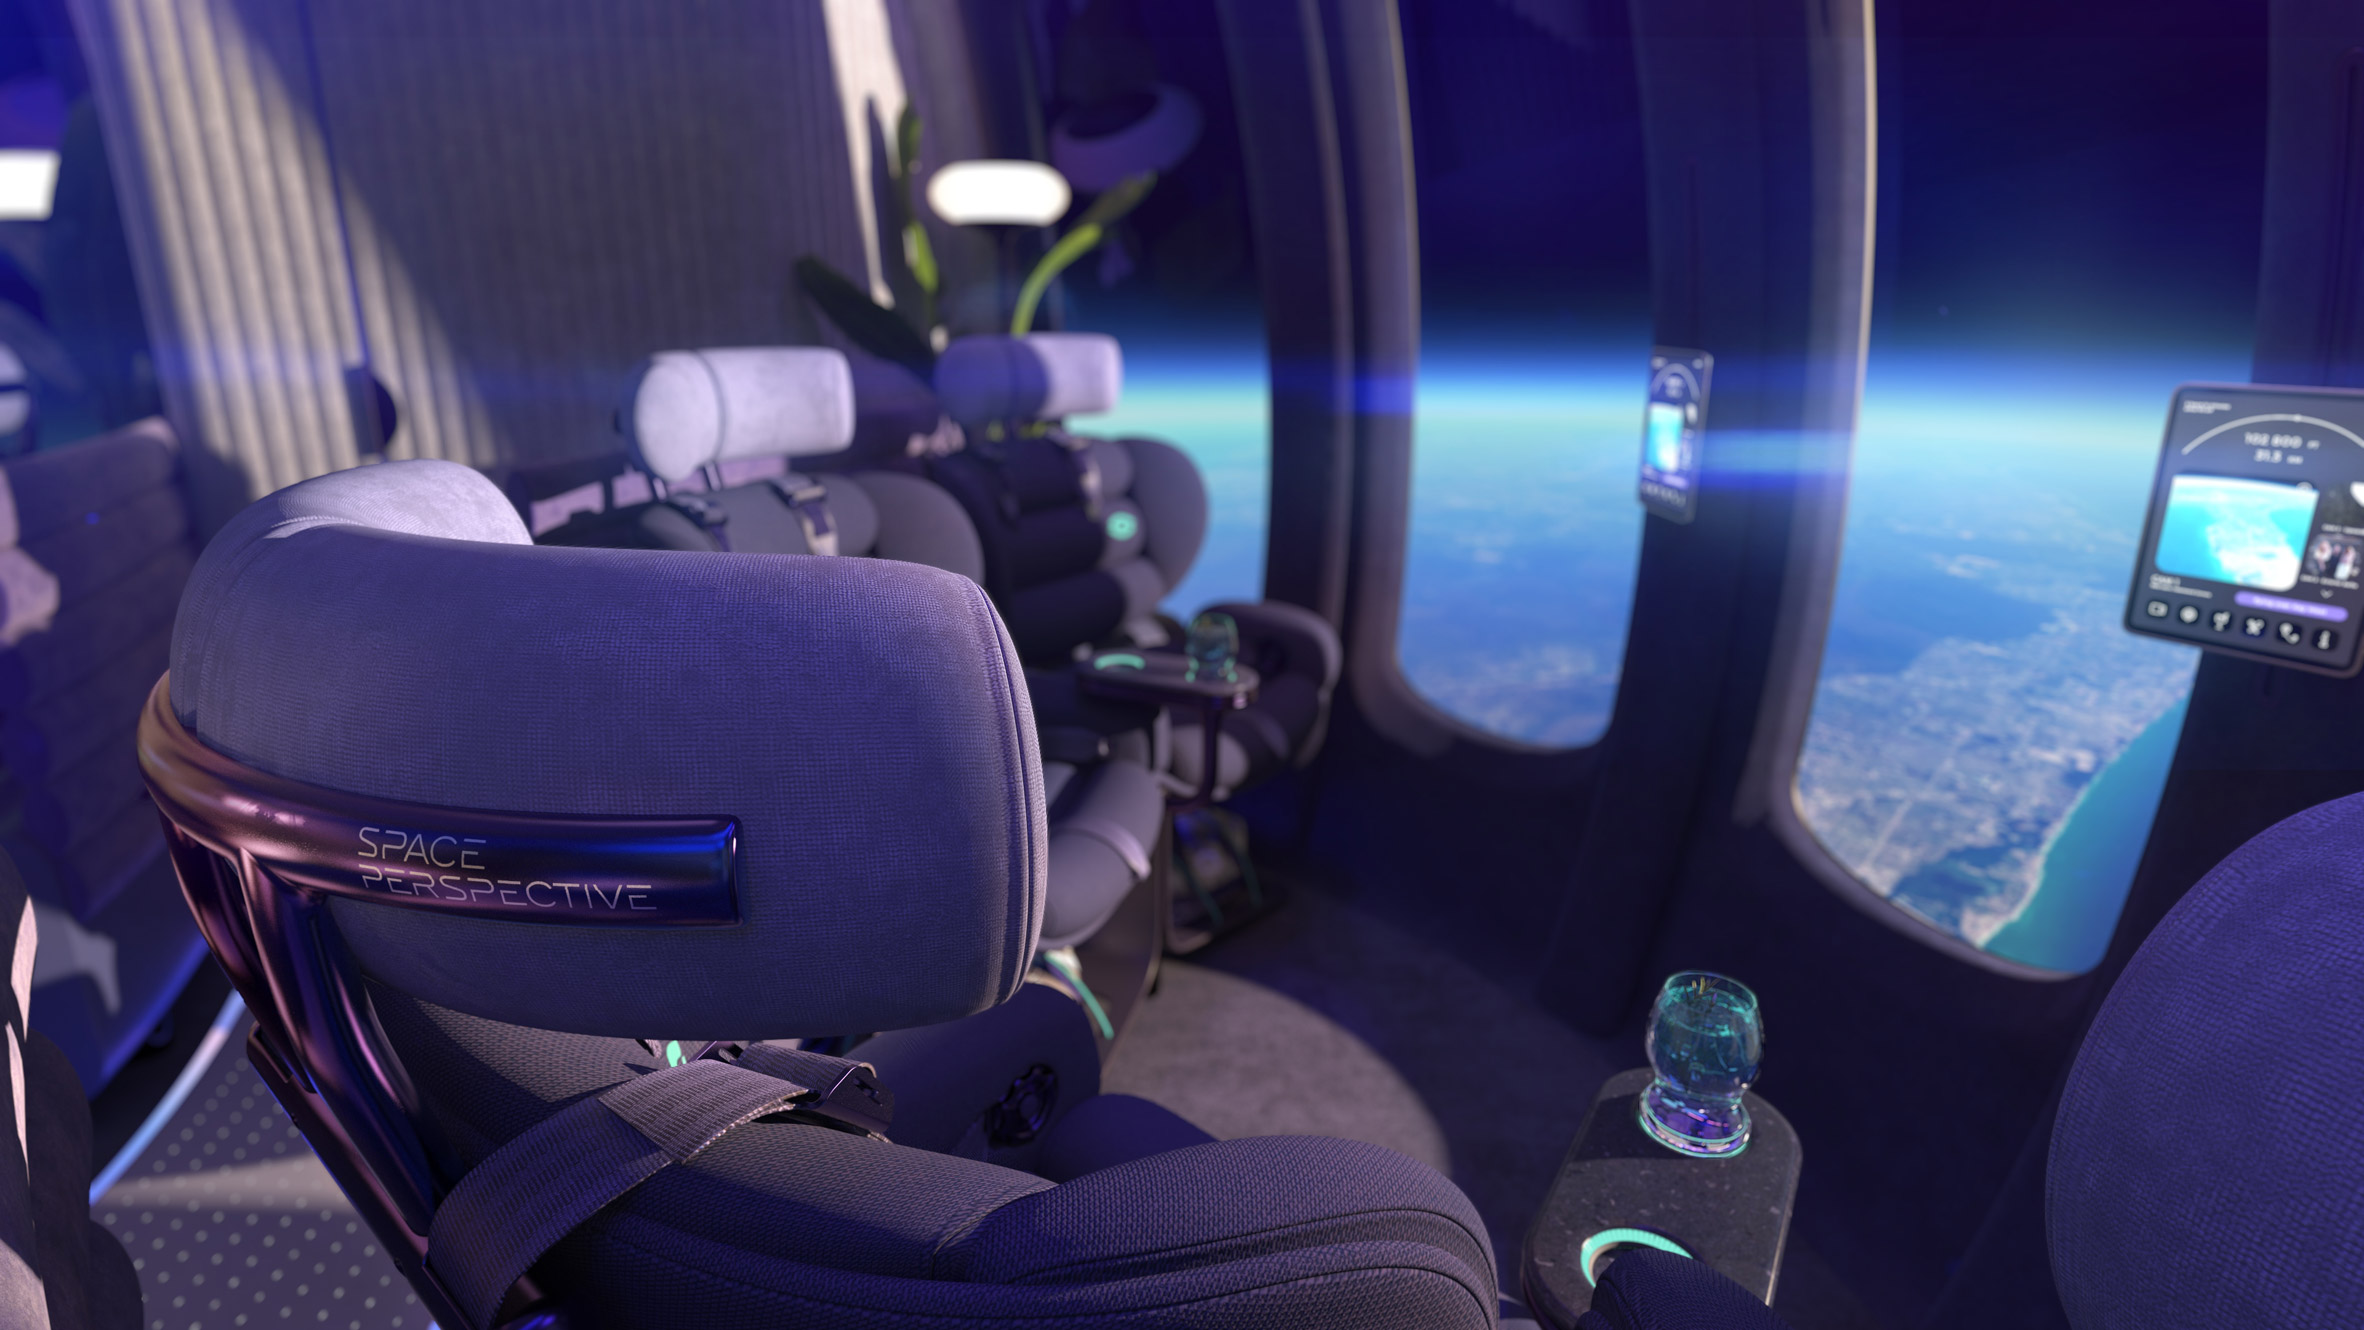 Rendering of the Neptune Space Lounge with seats facing tall windows showing views of Earth below